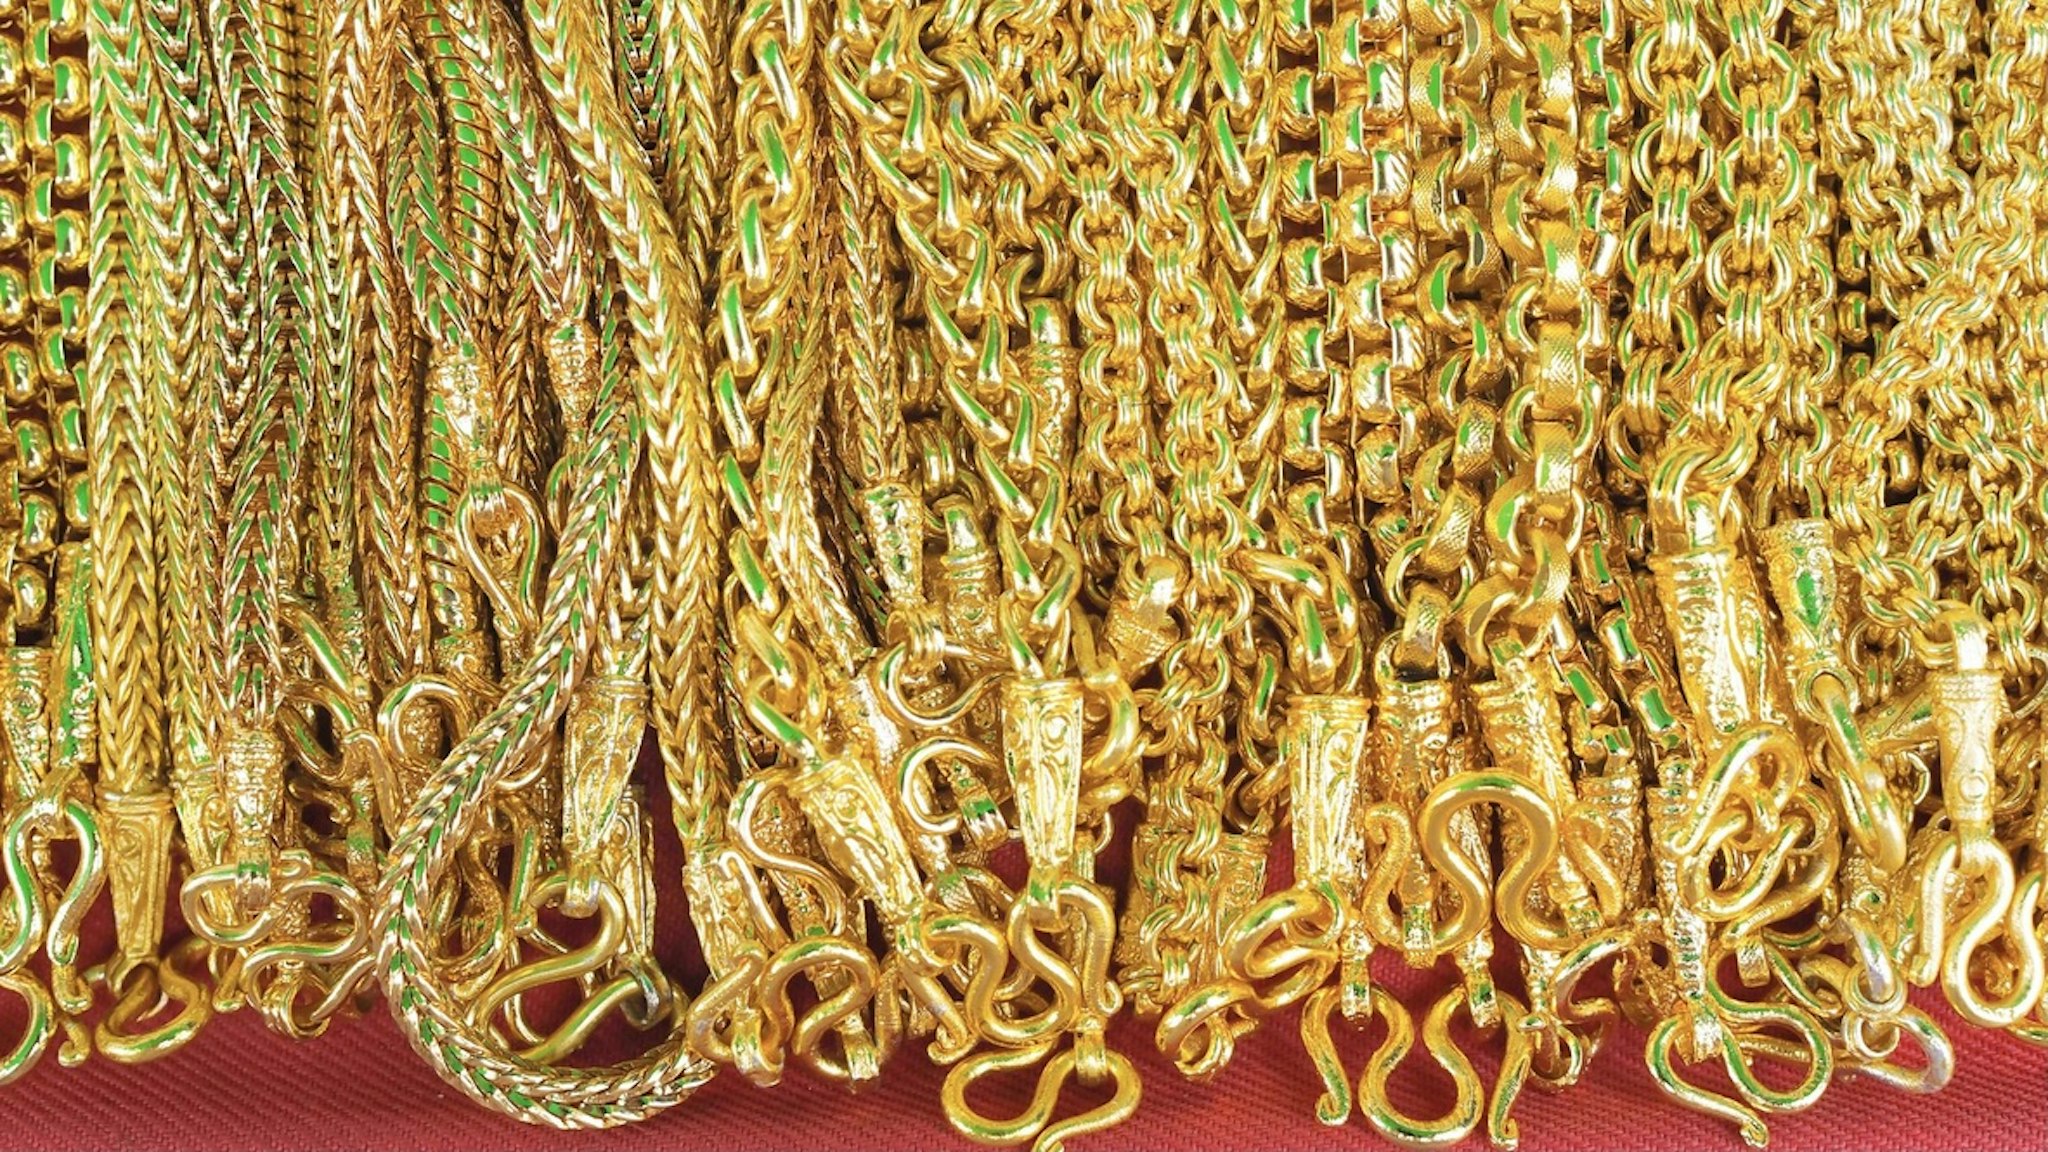 Close-Up Of Gold Chain Necklaces For Sale In Store - stock photo Apimook Pornsurin / EyeEm via Getty Images